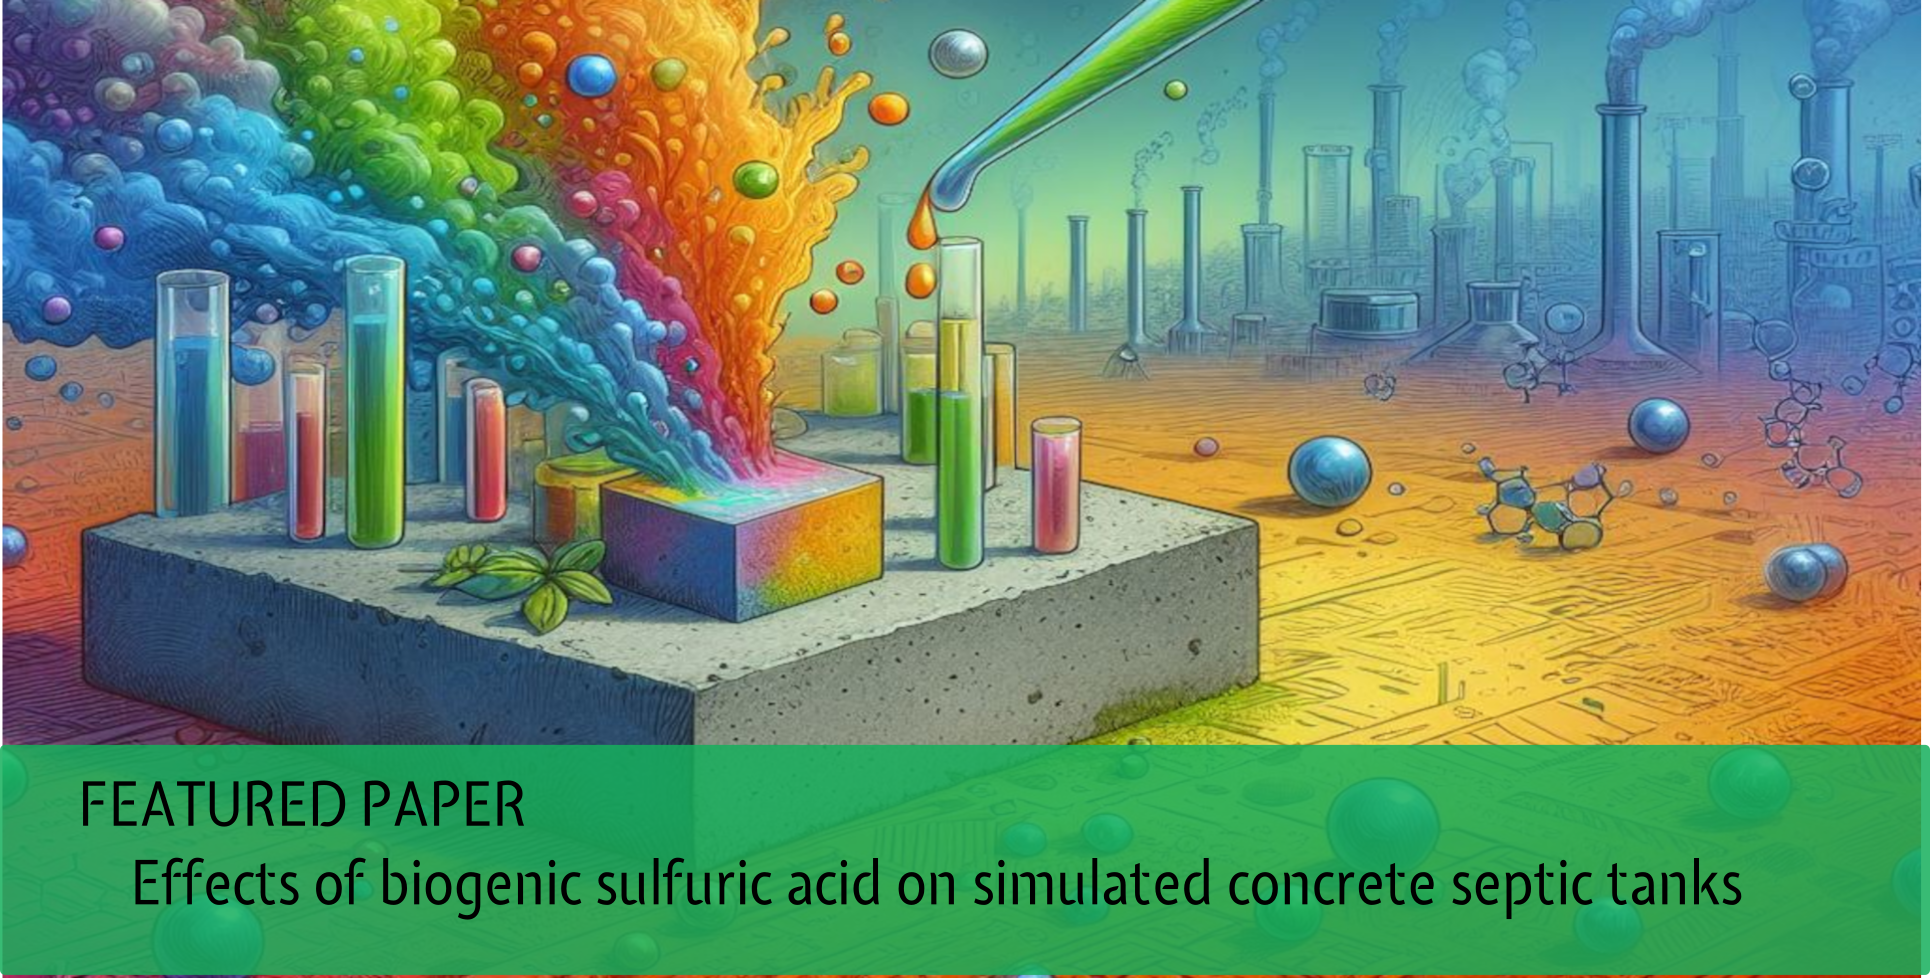 Featured publication - Effects of biogenic sulfuric acid on simulated concrete septic tanks